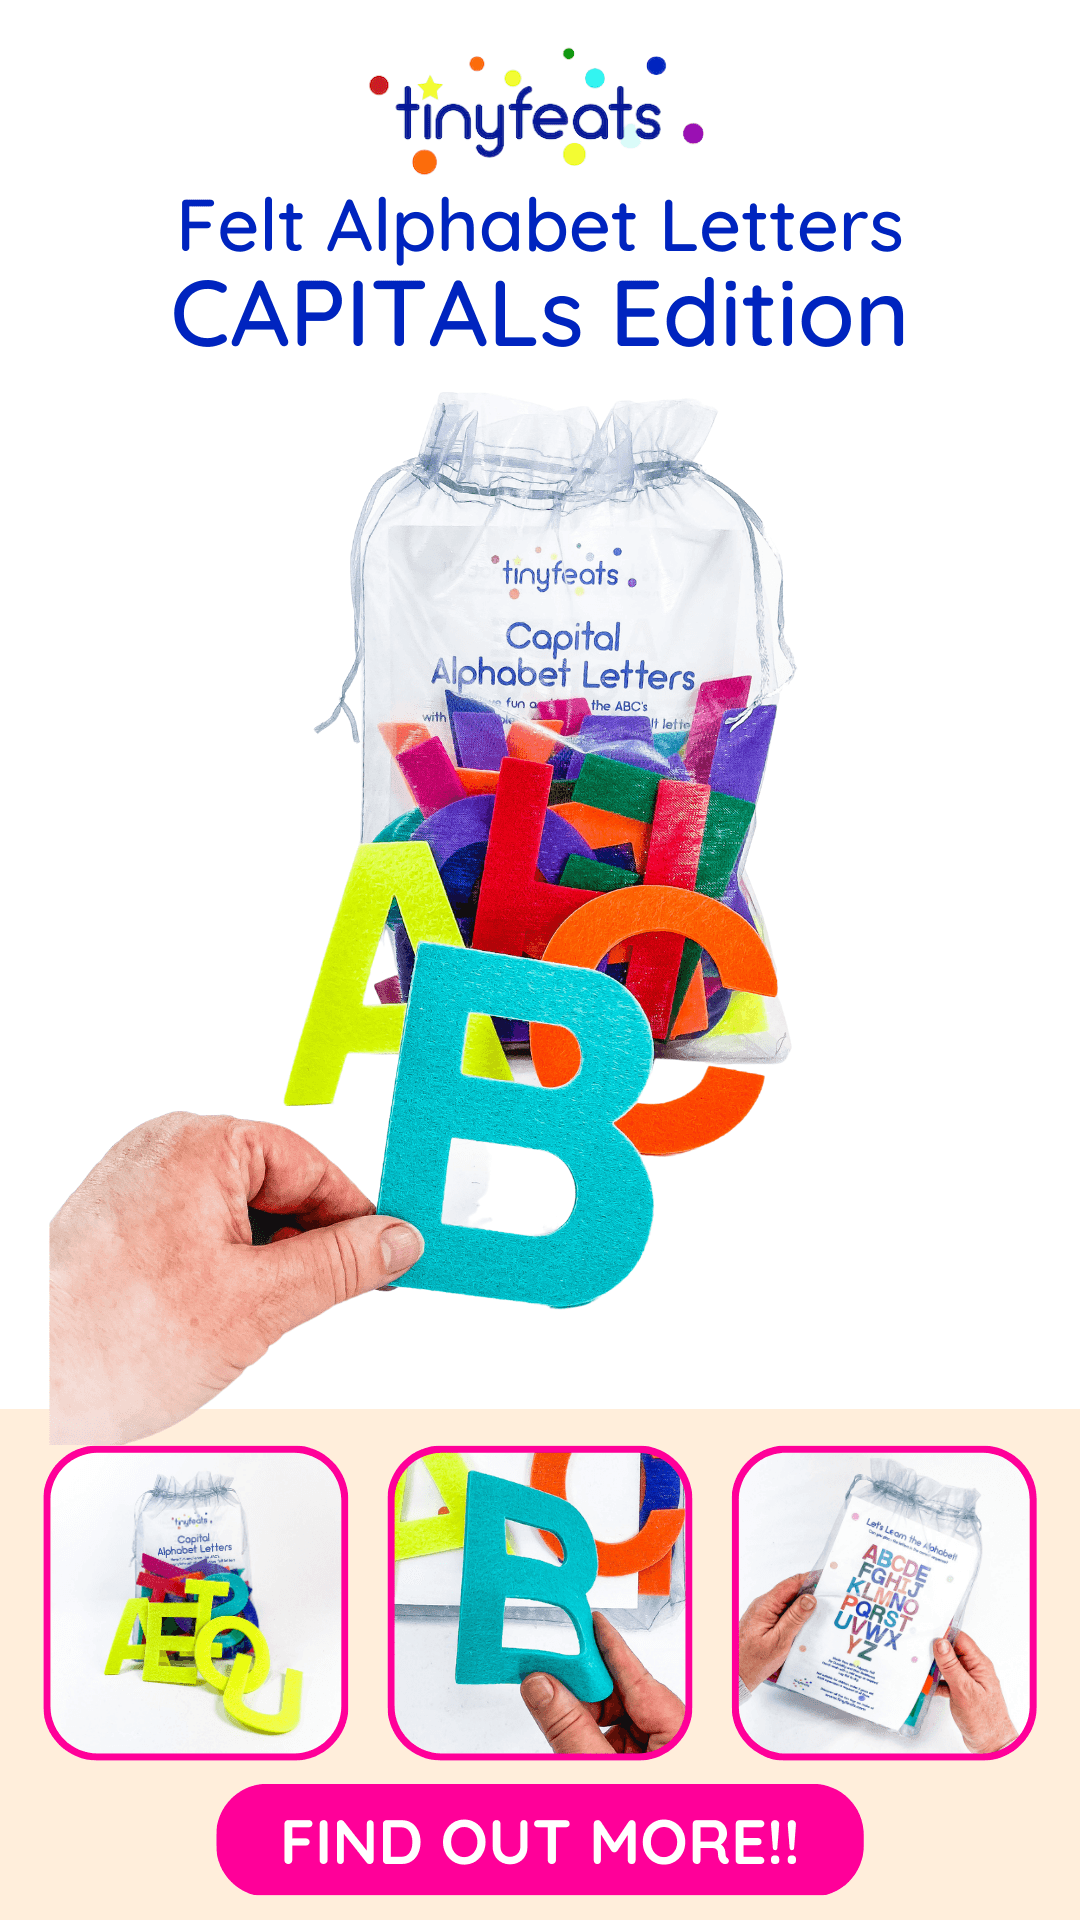 Introducing the CAPITAL Alphabet Letters Set - tinyfeats